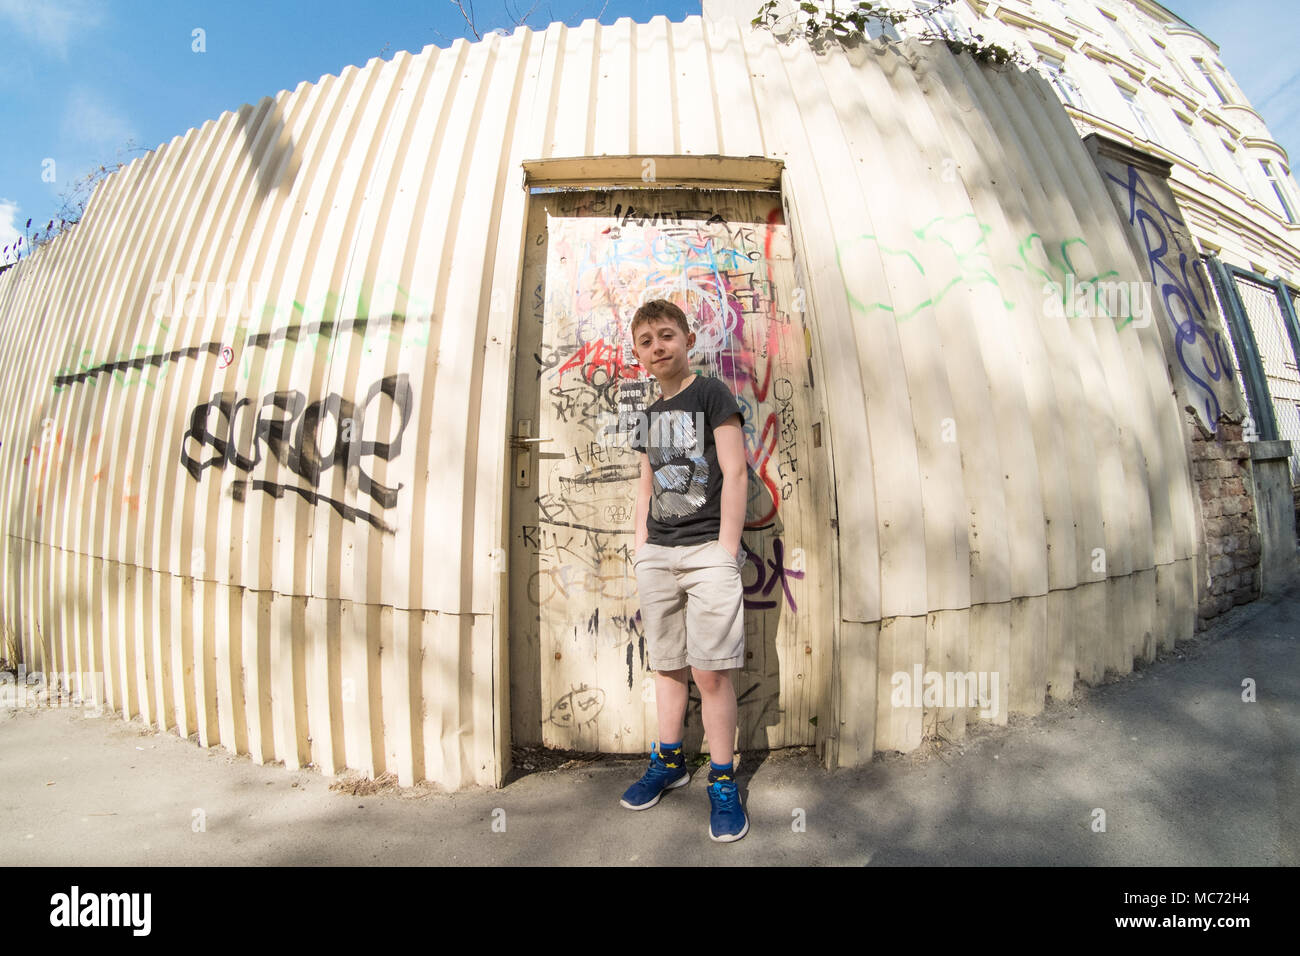 Eight year old boy standing in front of a graffiti covered doorway, Vienna, Austria, Europe. Stock Photo